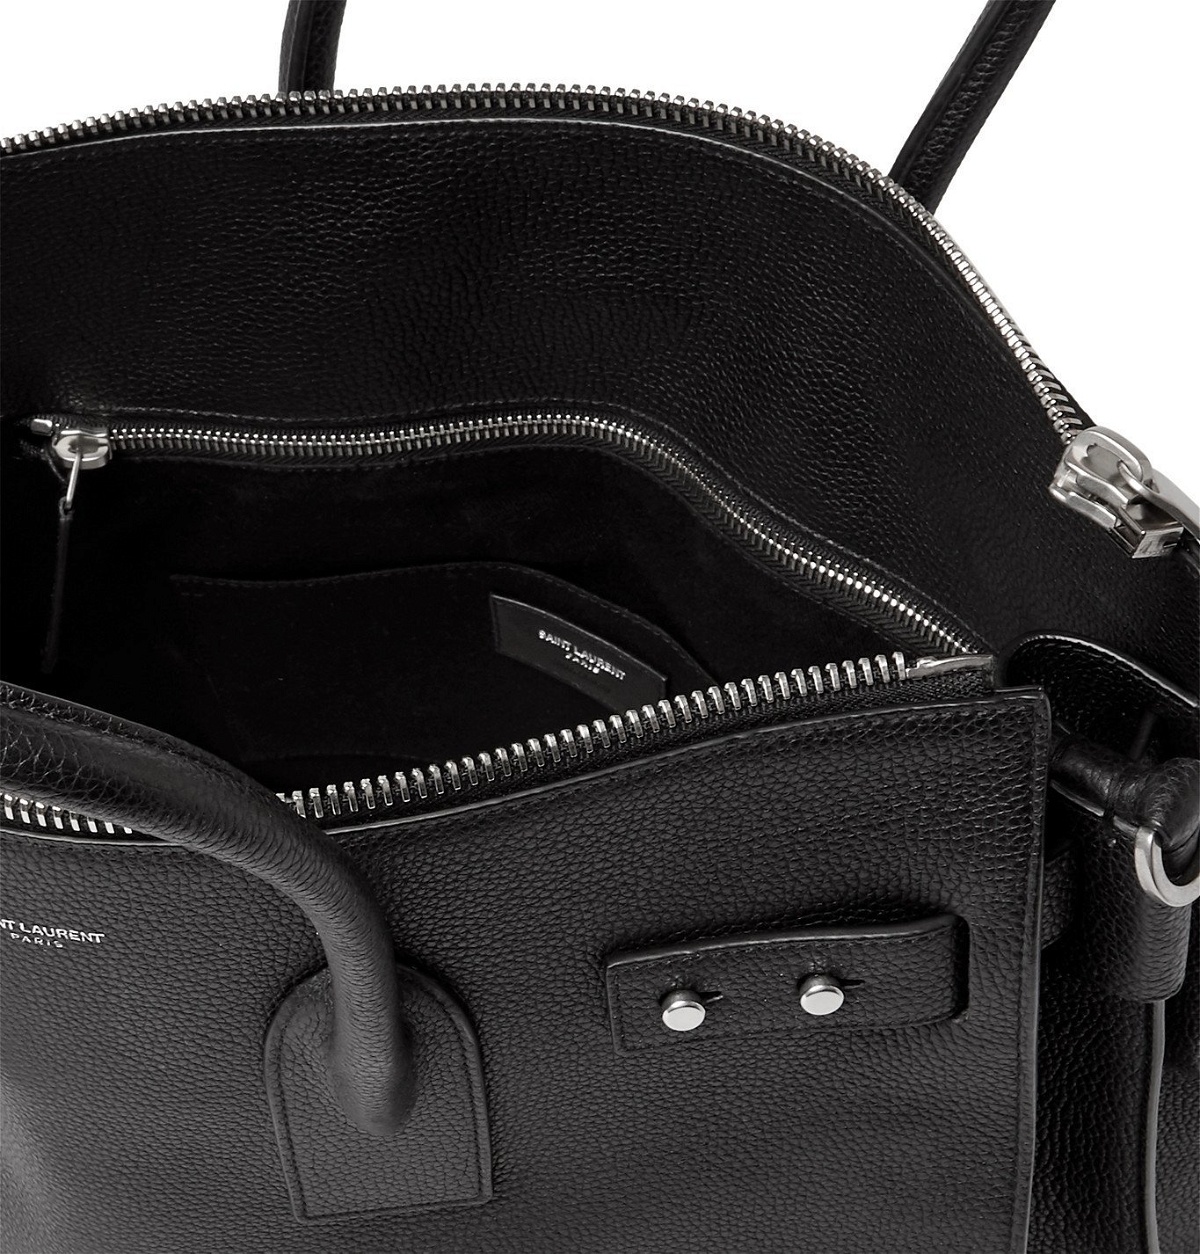 Giant Leather Bowling Bag in Black - Saint Laurent